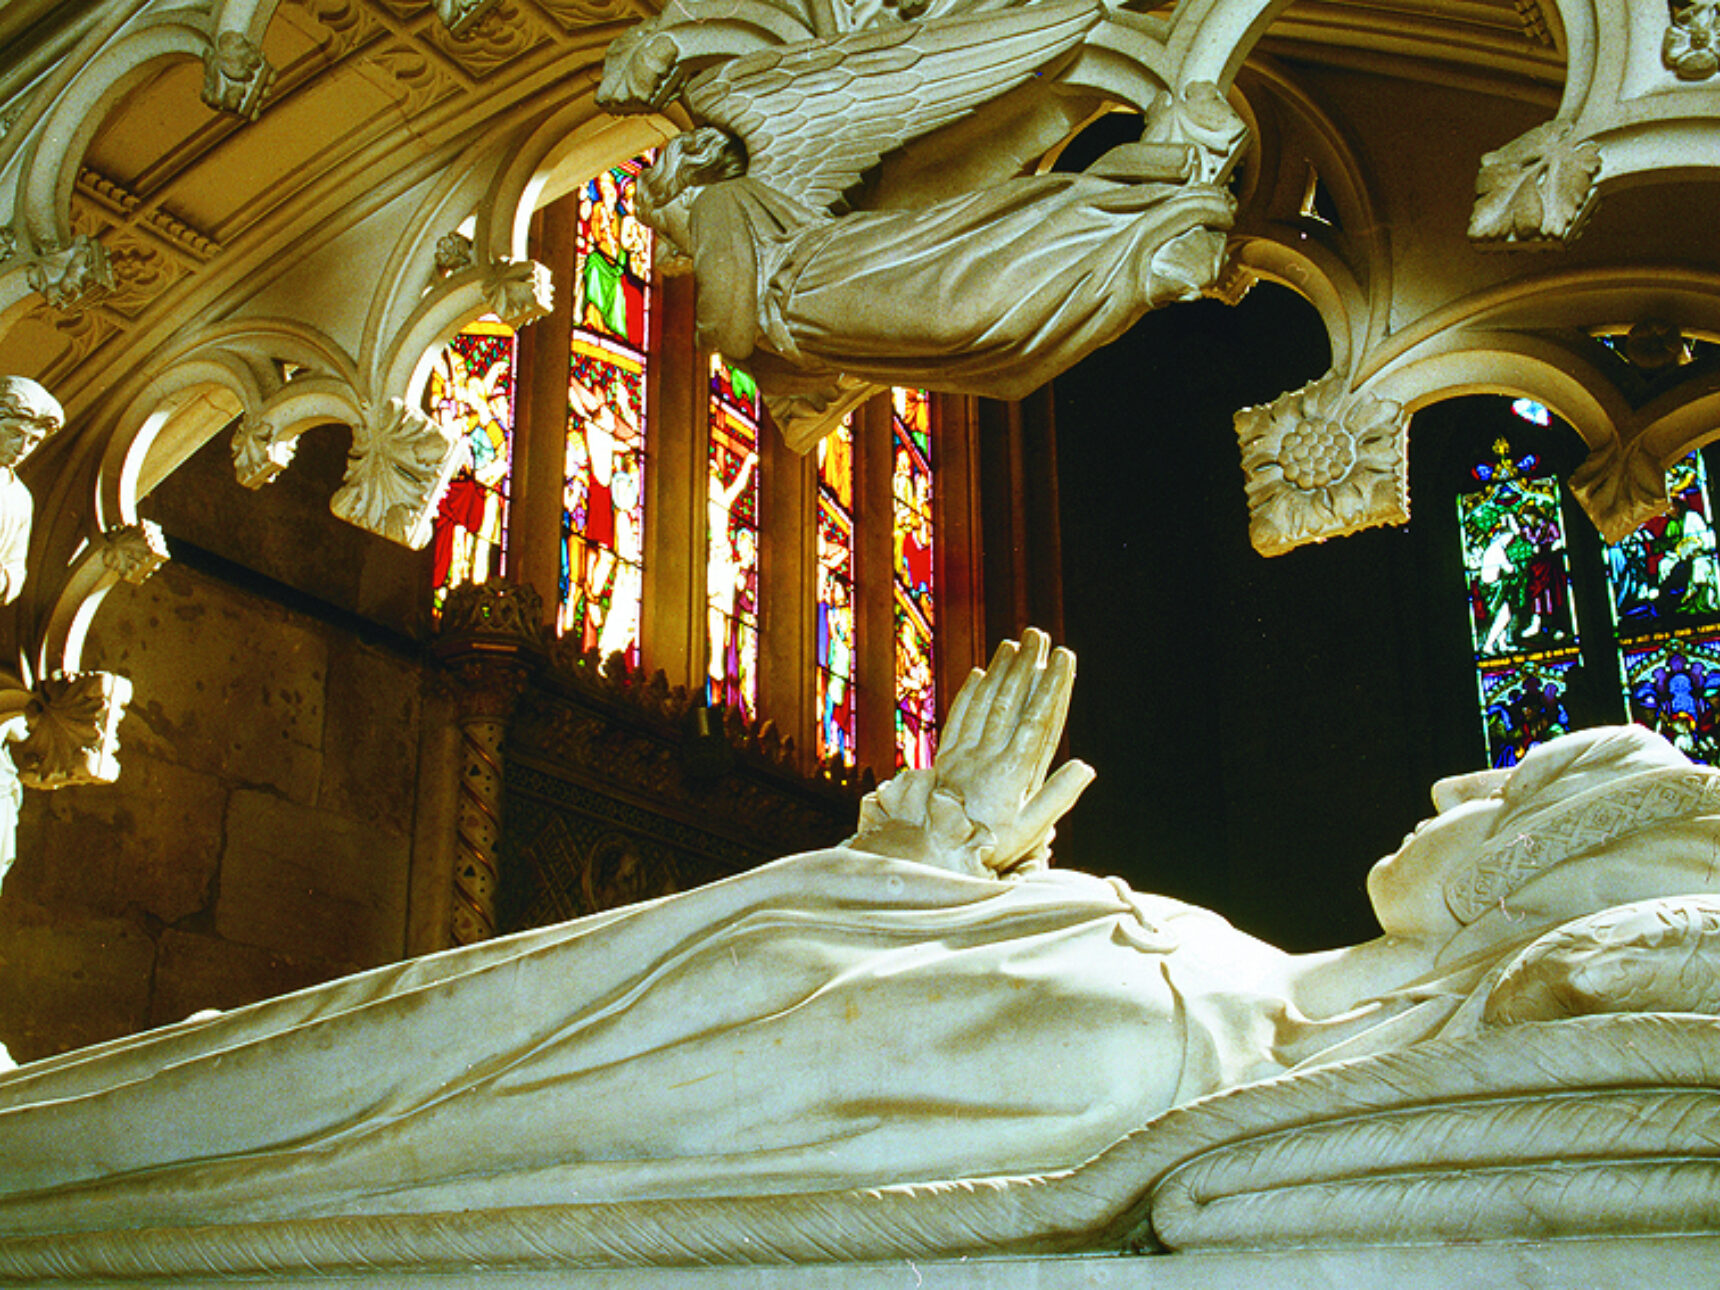 On the 30th August 1548, 36 year old Katherine Parr gave birth to a daughter, Mary, but died seven days later. Discover her final resting place in St Mary's Chapel within the grounds.